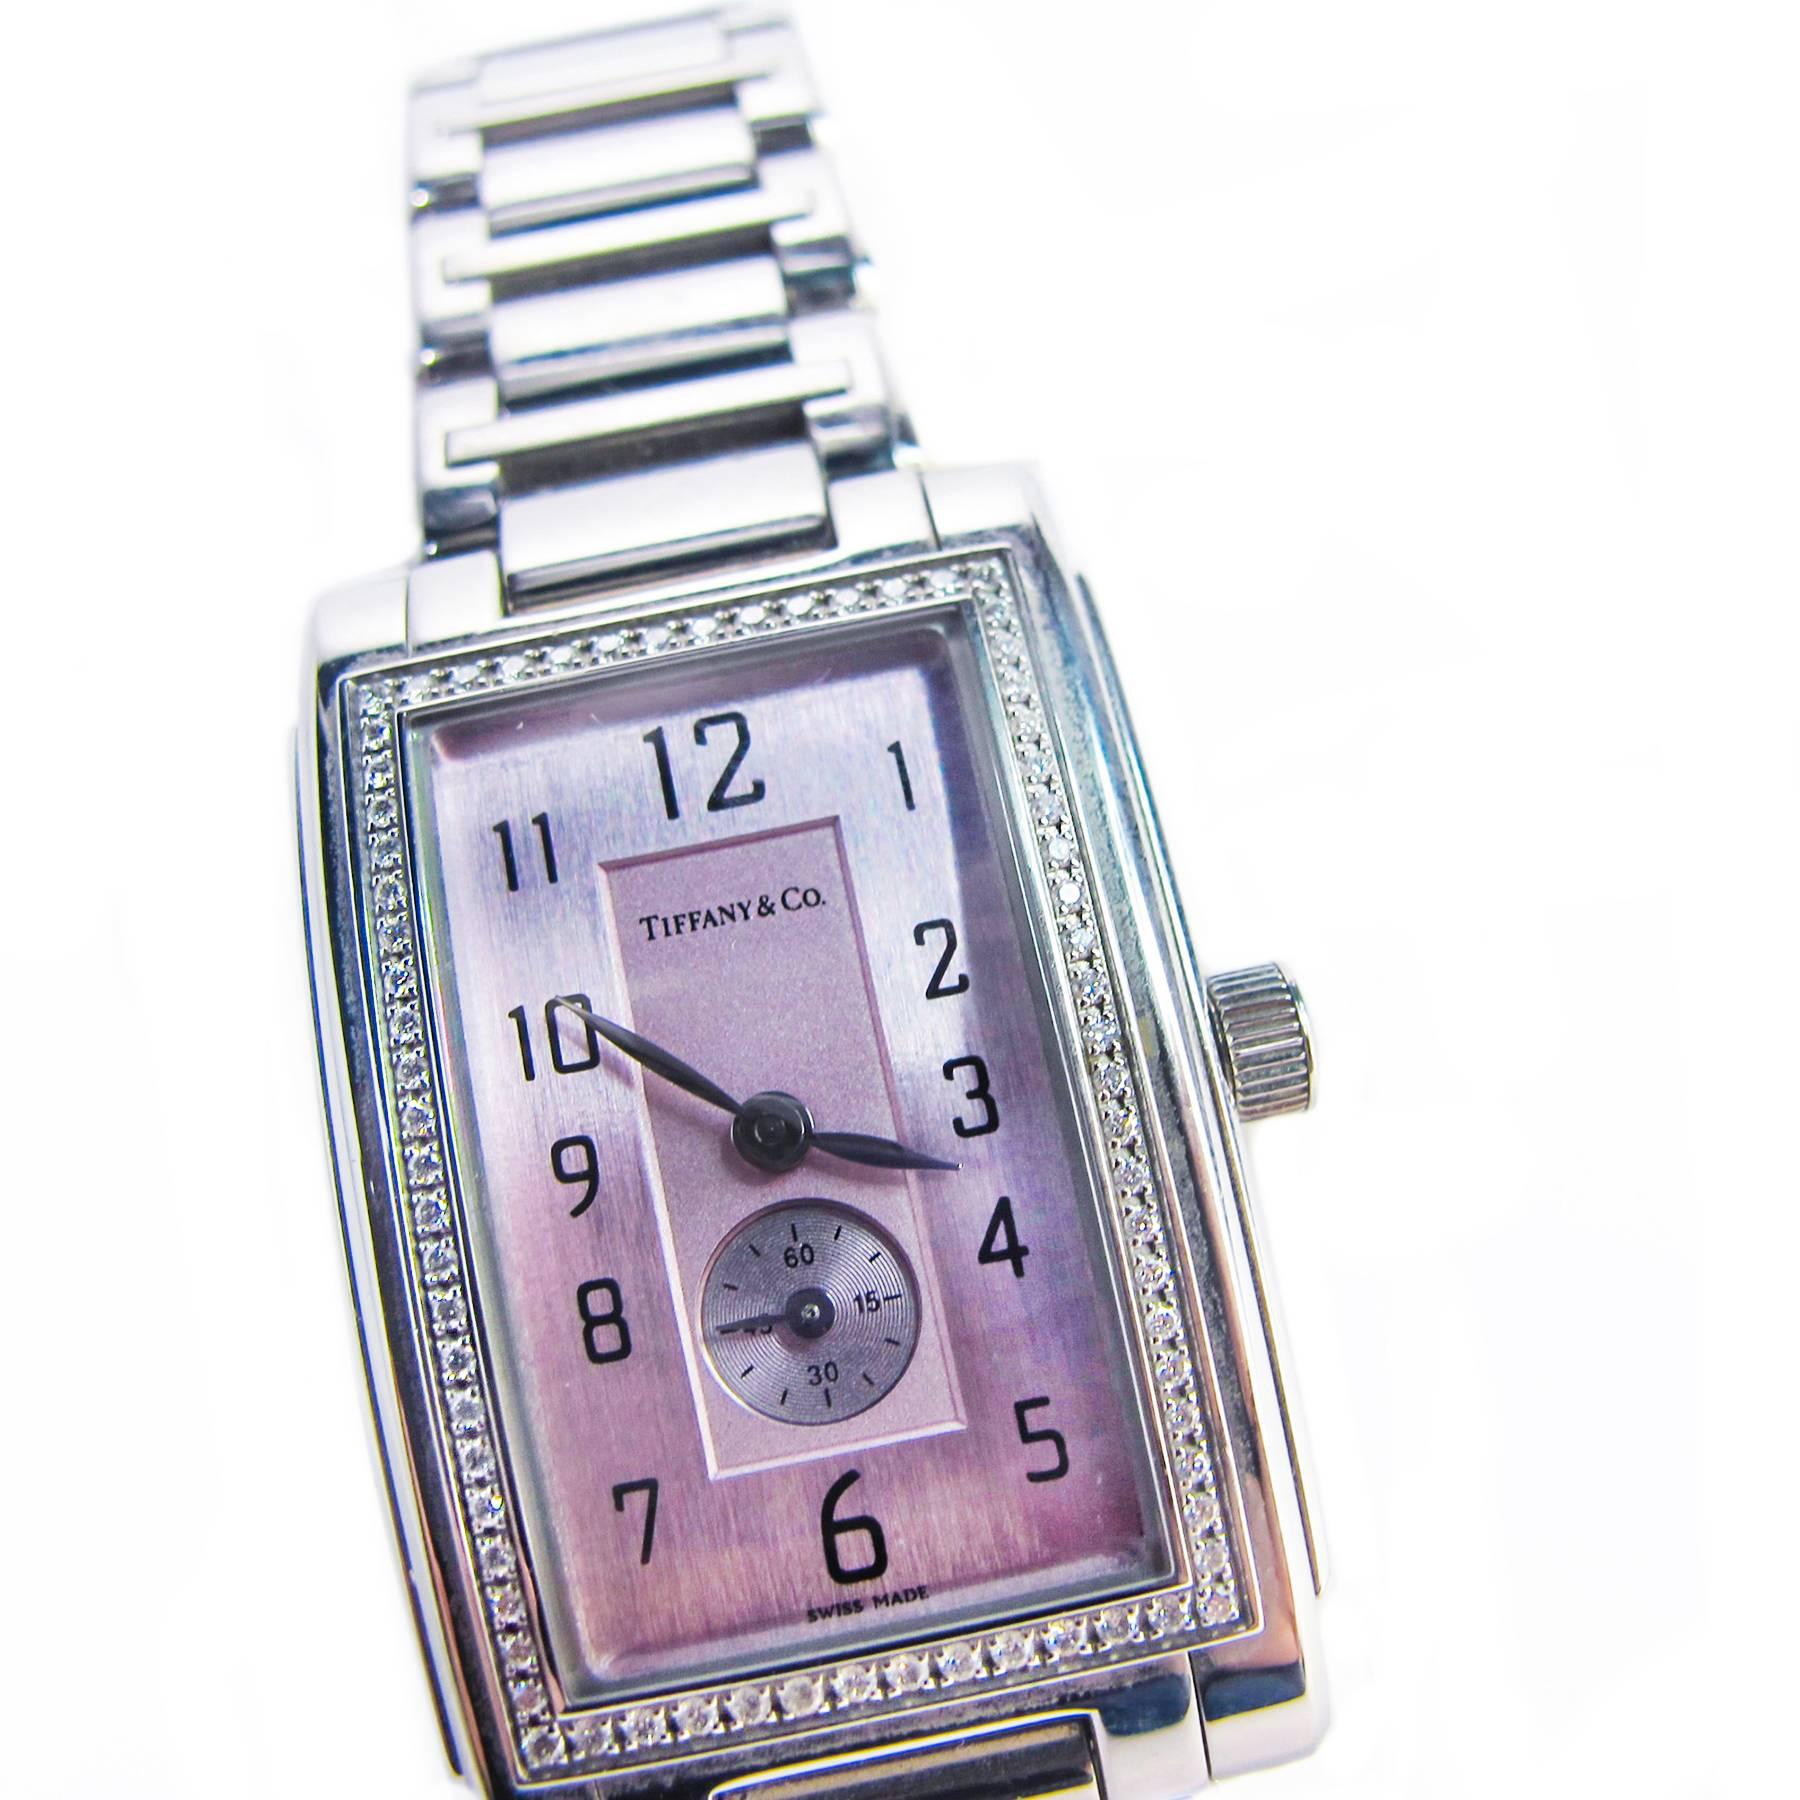 Tiffany & Co. Stainless Steel Diamond Grand Quartz Resonator wristwatch  In New Condition For Sale In Toronto, Ontario